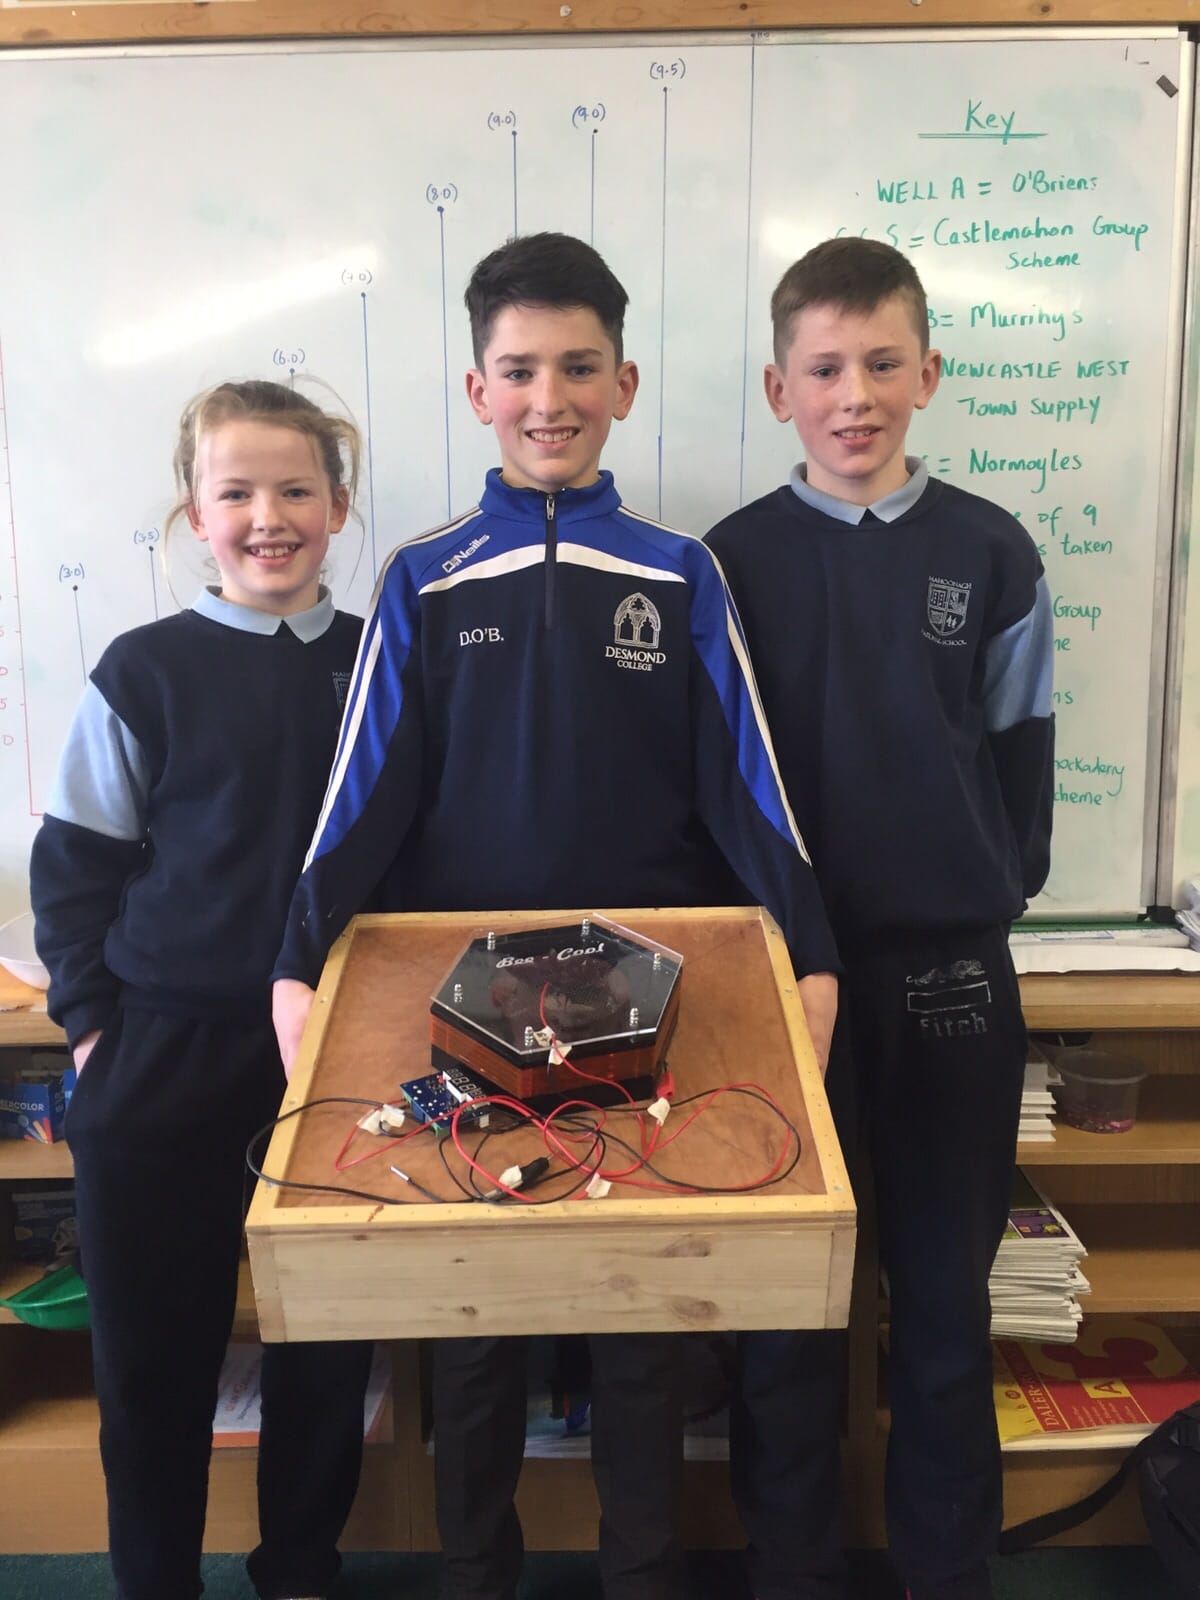 Jan 2016: David O'Brien Desmond College proudly showing off his young scientist project to his brother and sister on his recent visit to Mahoonagh National School